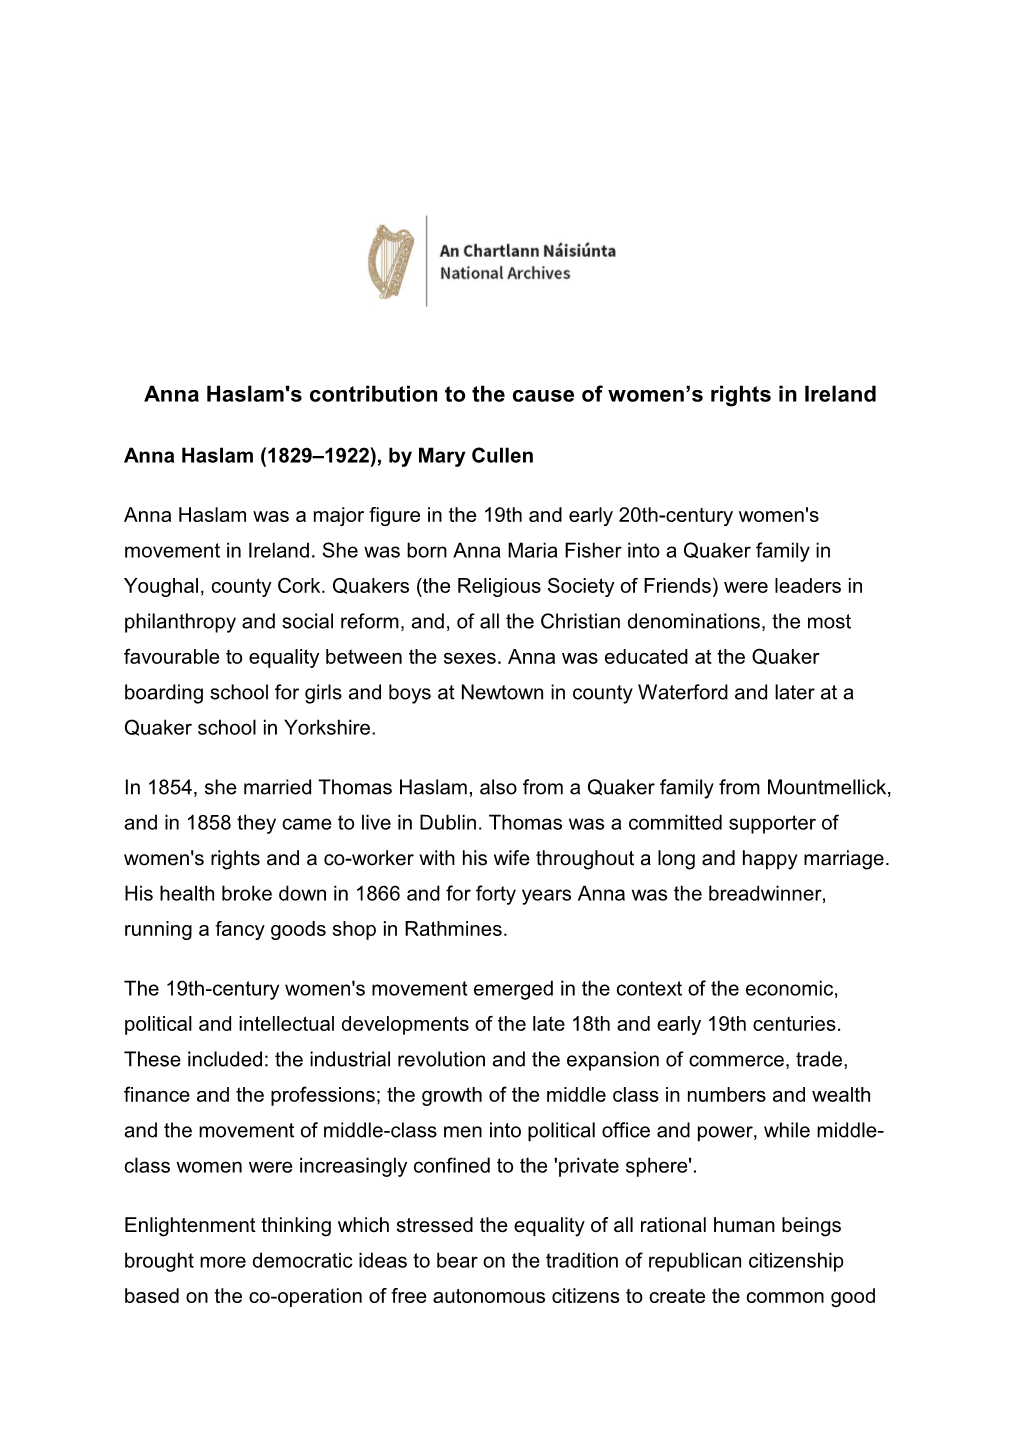 Anna Haslam's Contribution to the Cause of Women's Rights in Ireland